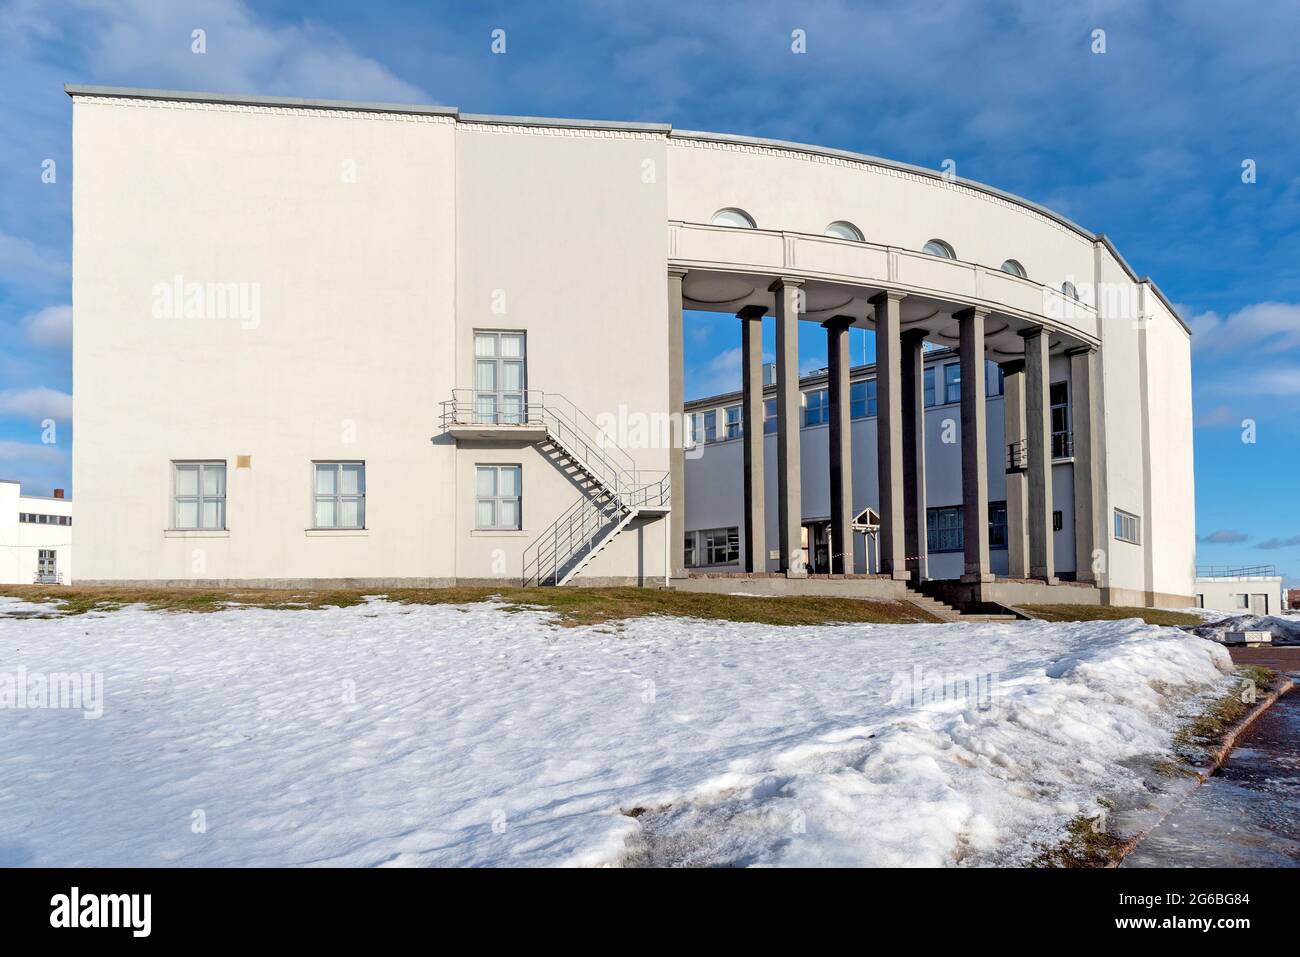 Vyborg, Leningrad Region, Russia - March 4, 2021: View of The Hermitage-Vyborg Exhibition Center. The building was built in 1930 Stock Photo